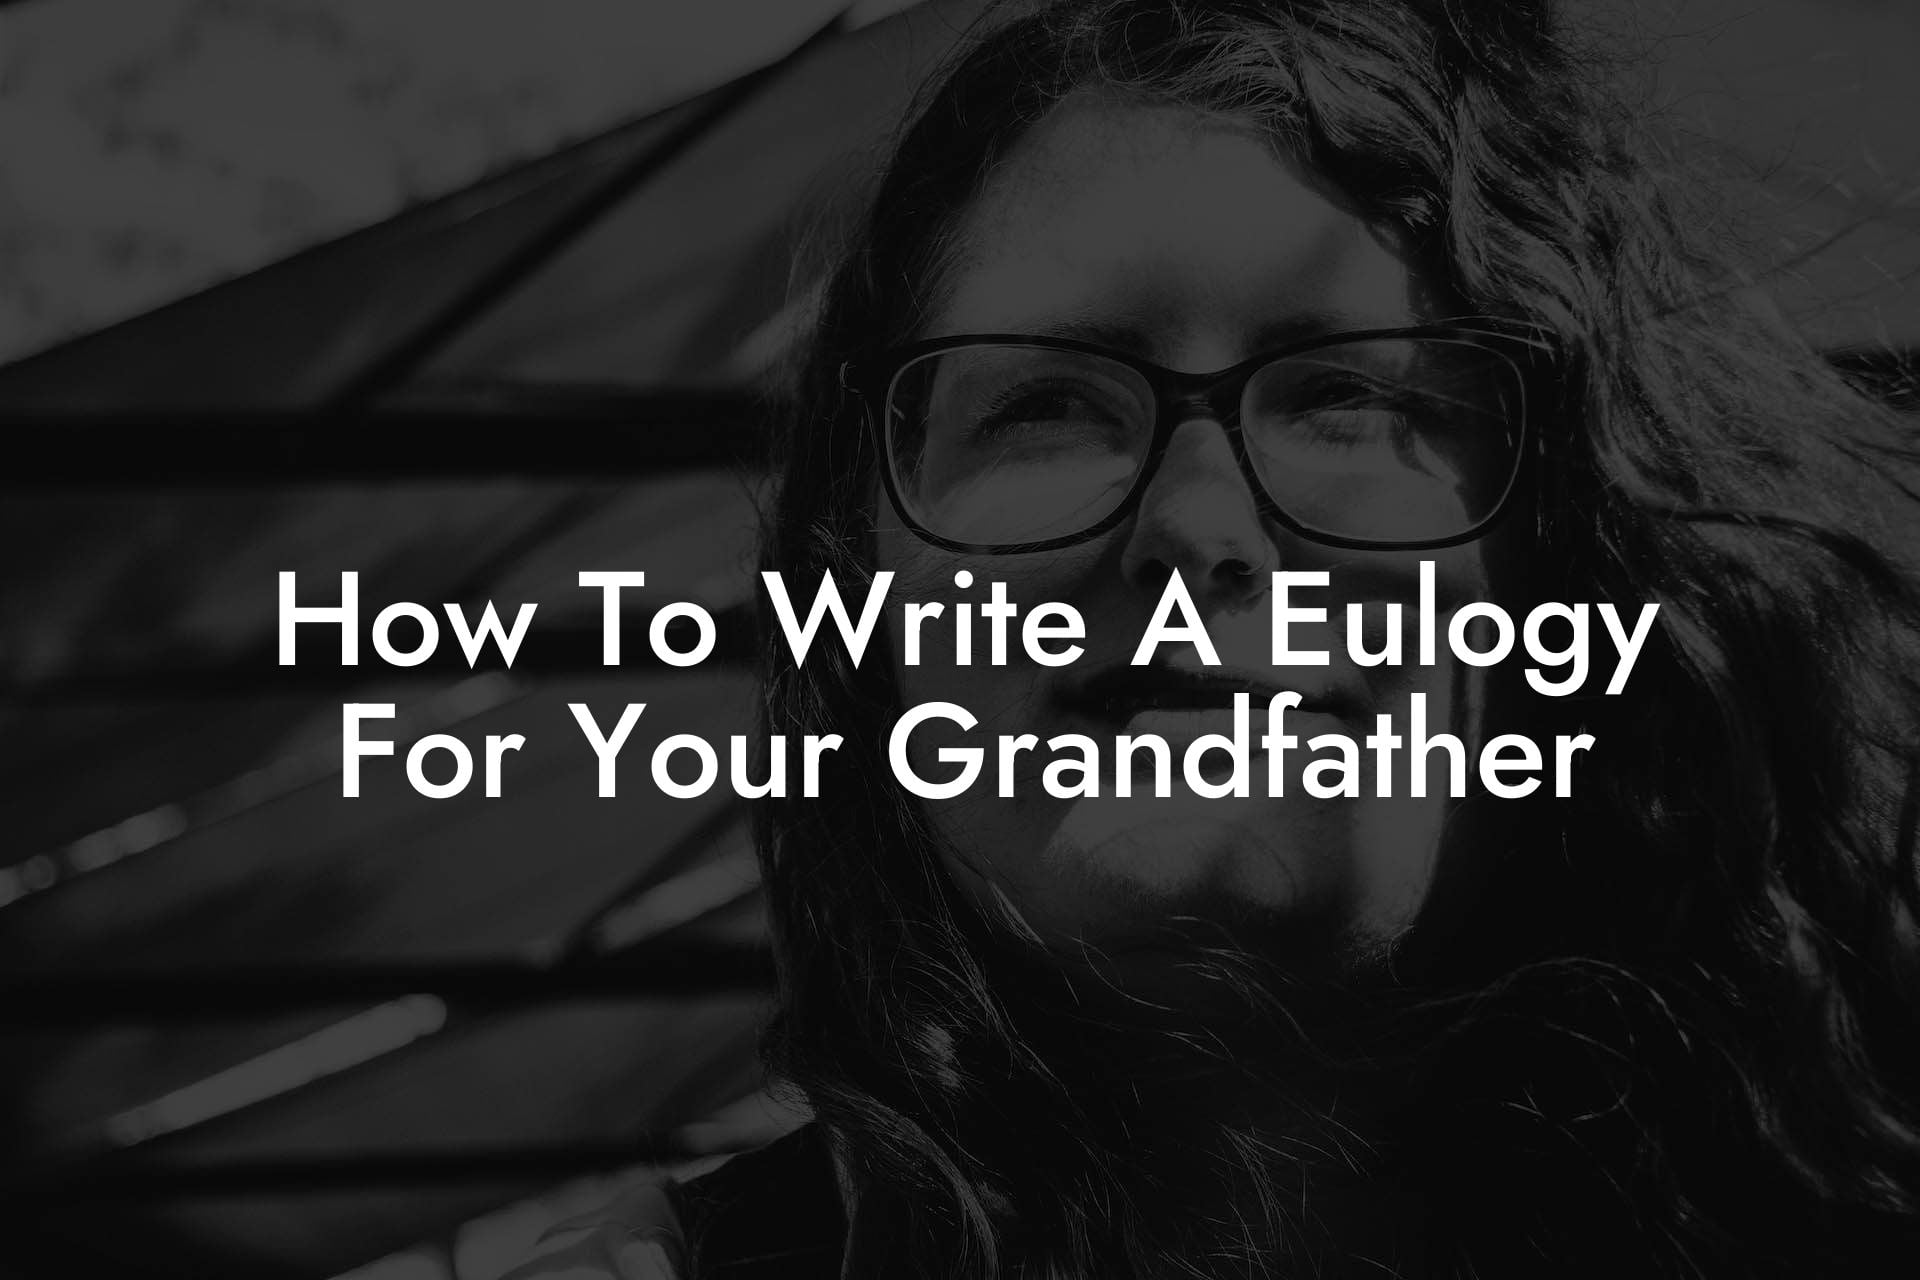 How To Write A Eulogy For Your Grandfather